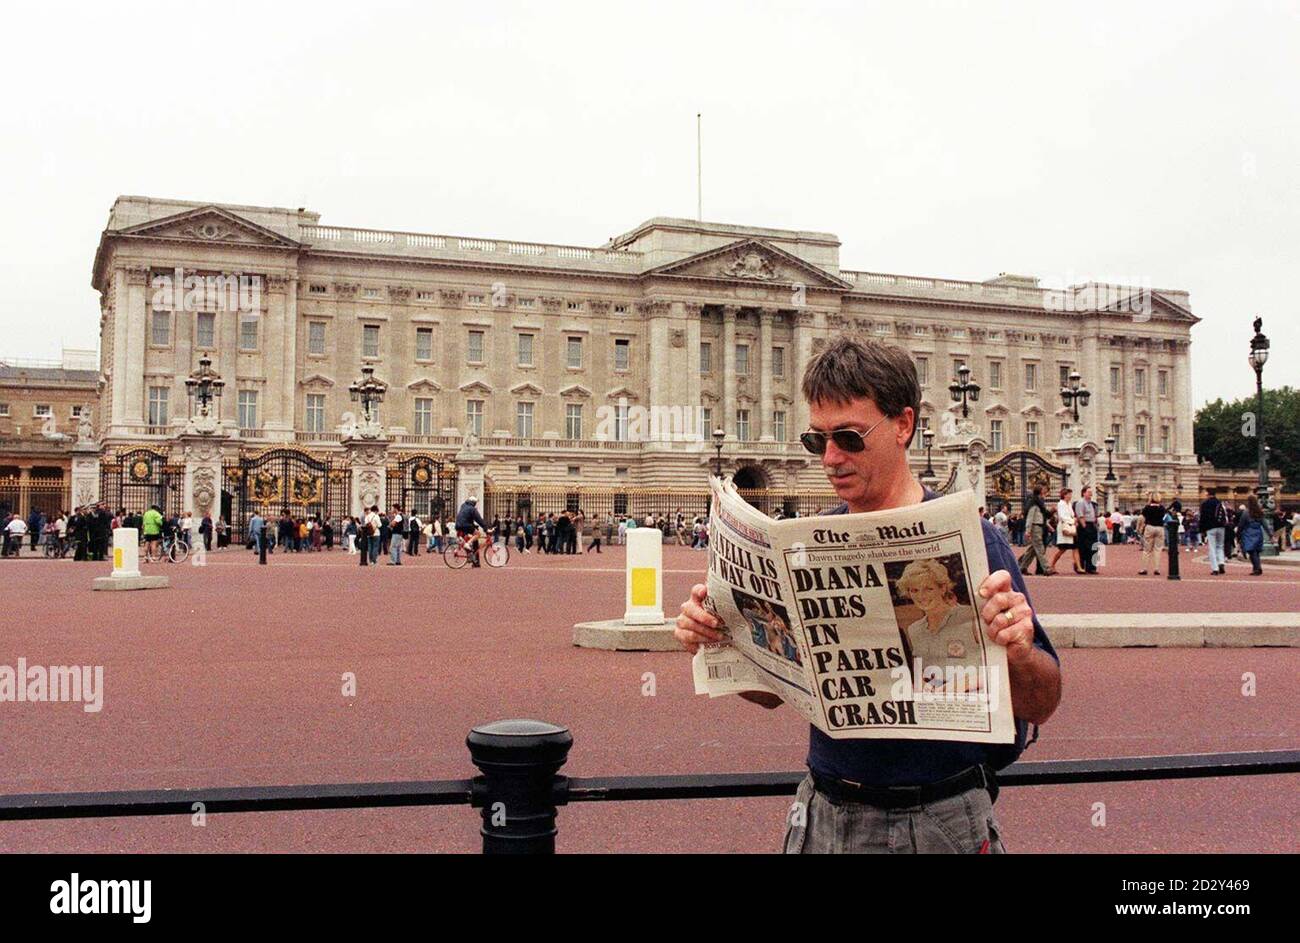 A member of the public reading the shocking news of Diana's death.  ph: sam pearce 31-8-97 Stock Photo